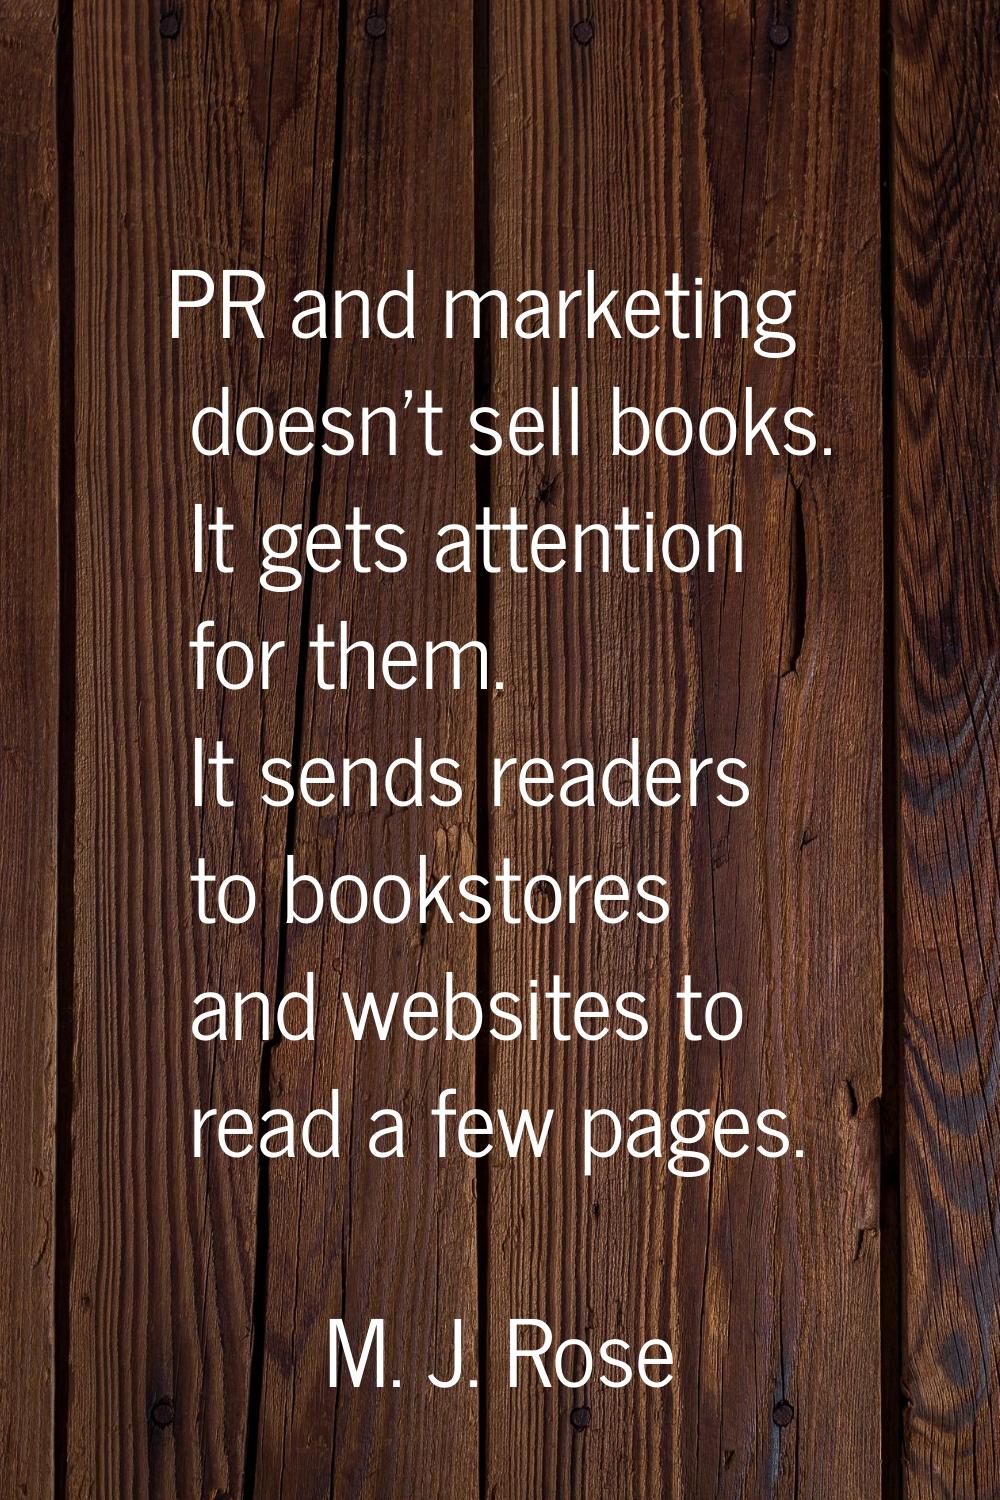 PR and marketing doesn't sell books. It gets attention for them. It sends readers to bookstores and